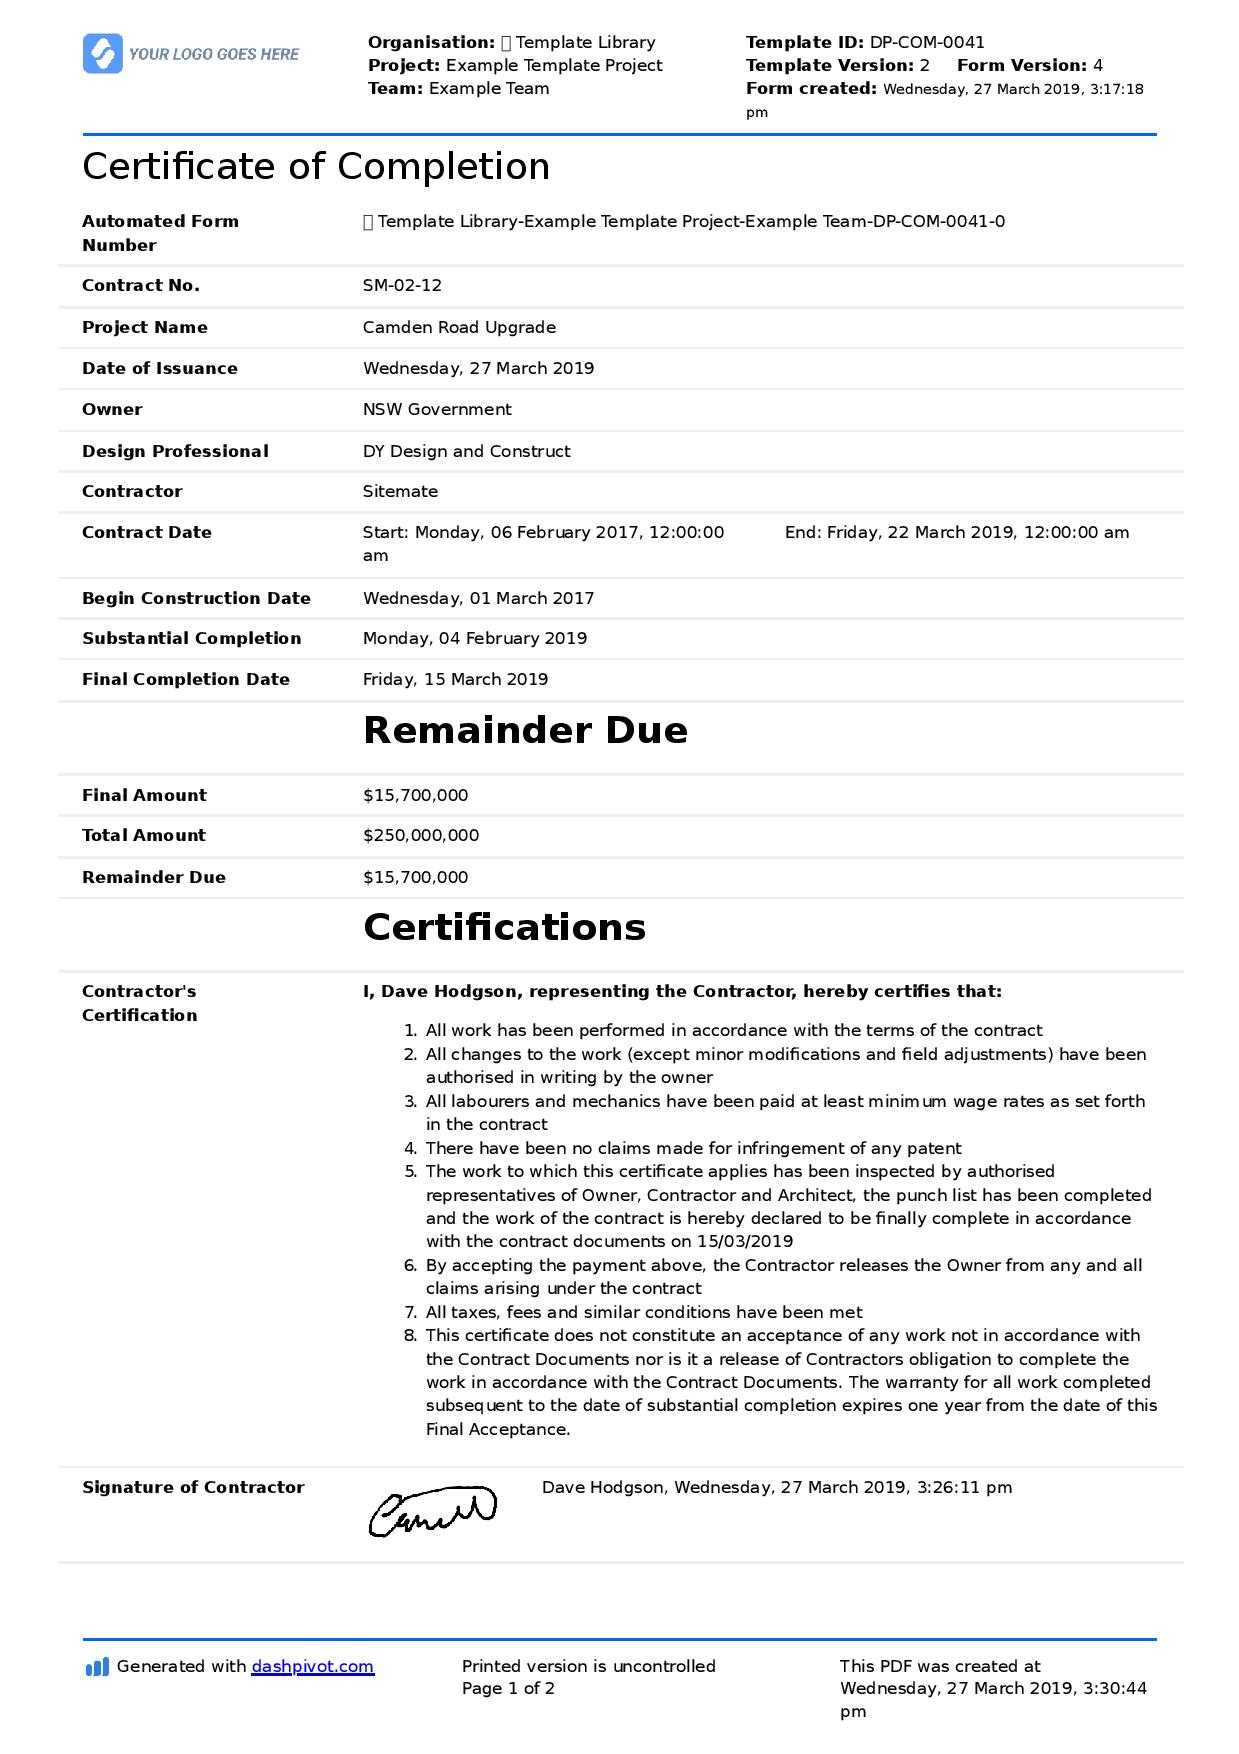 Certificate Of Completion For Construction (Free Template + Intended For Certificate Of Acceptance Template